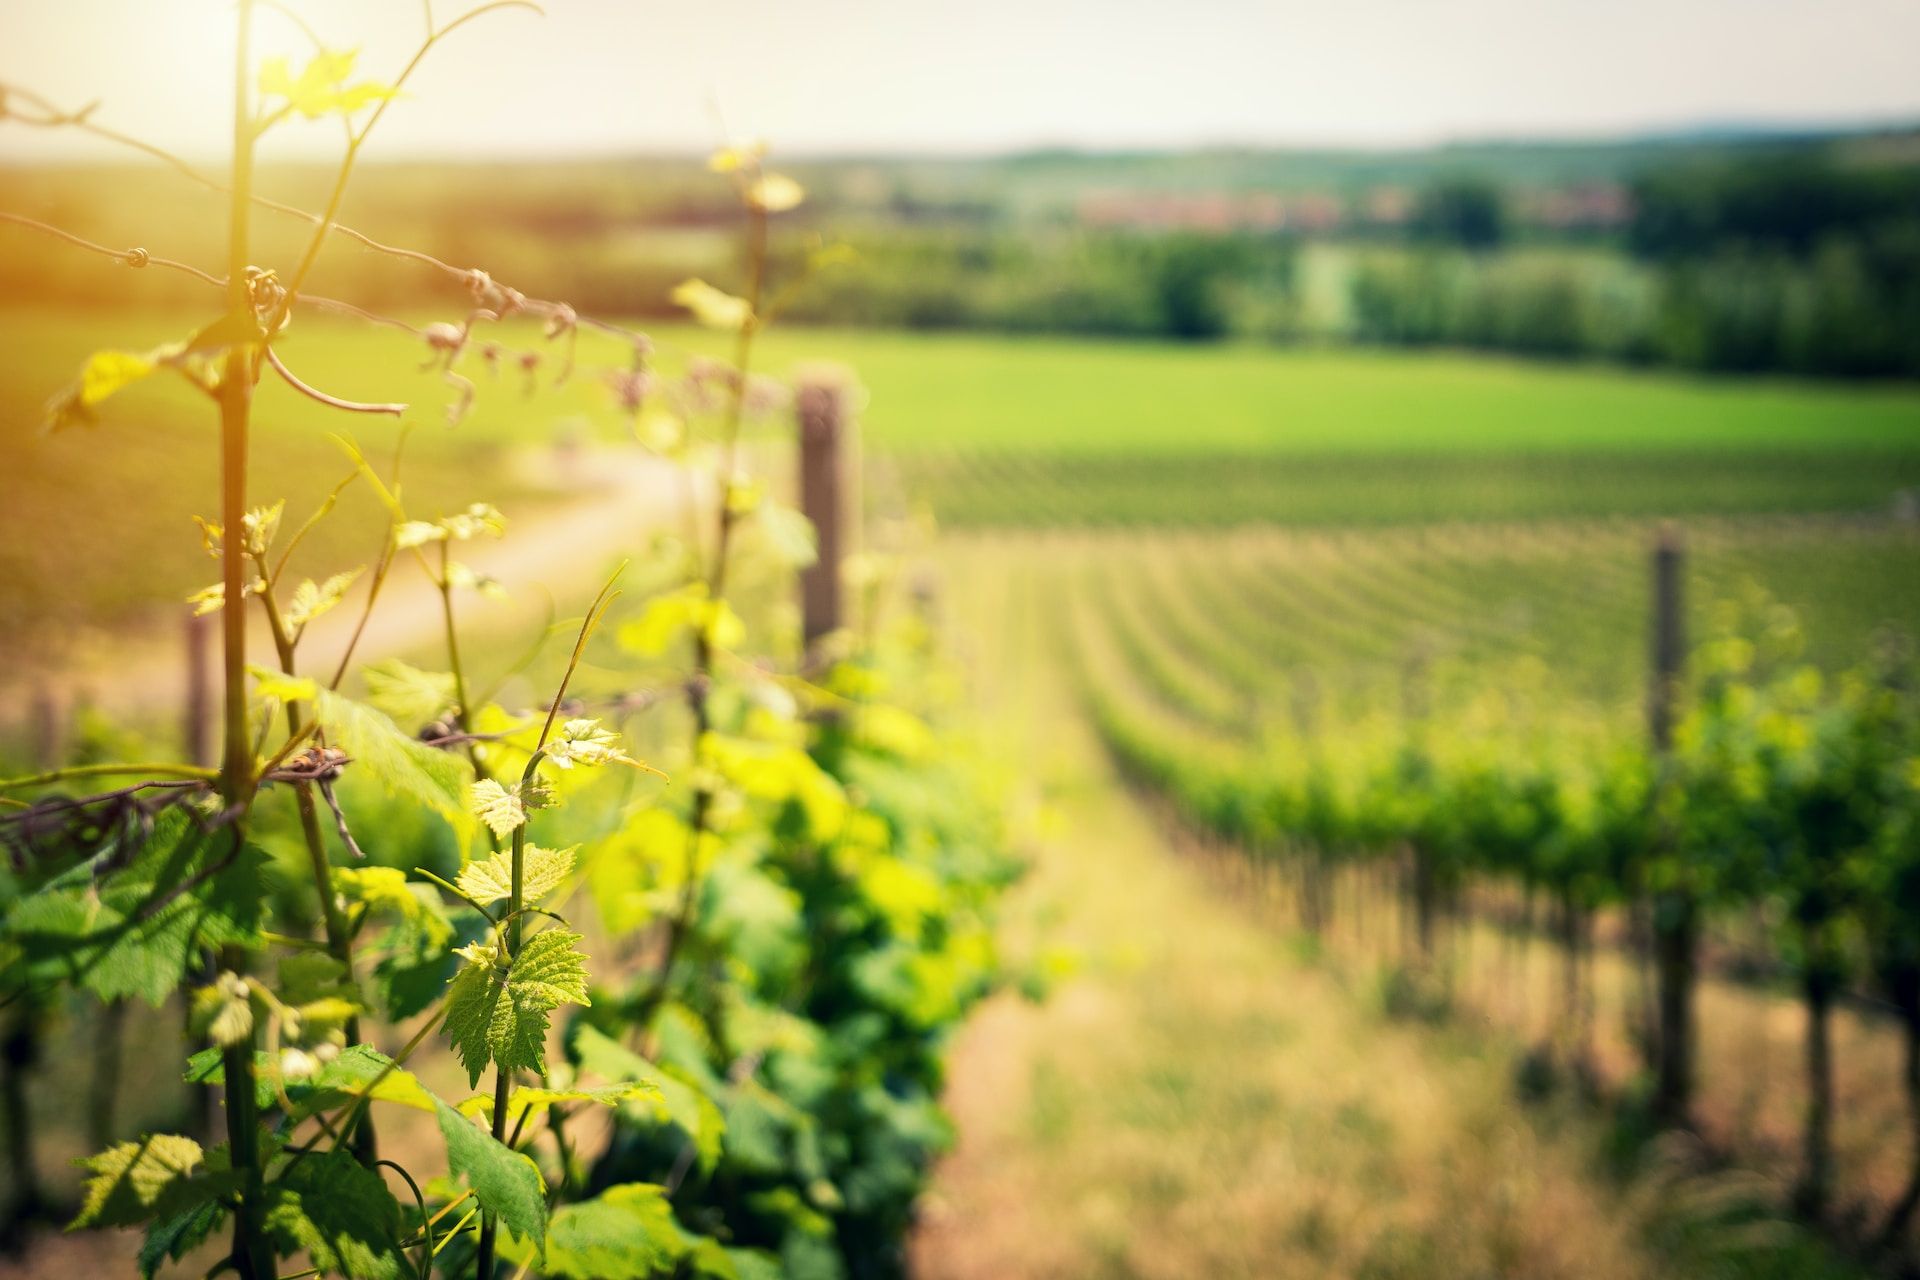 An artistic photo of a beautiful vineyard with grape vines on a sunny day